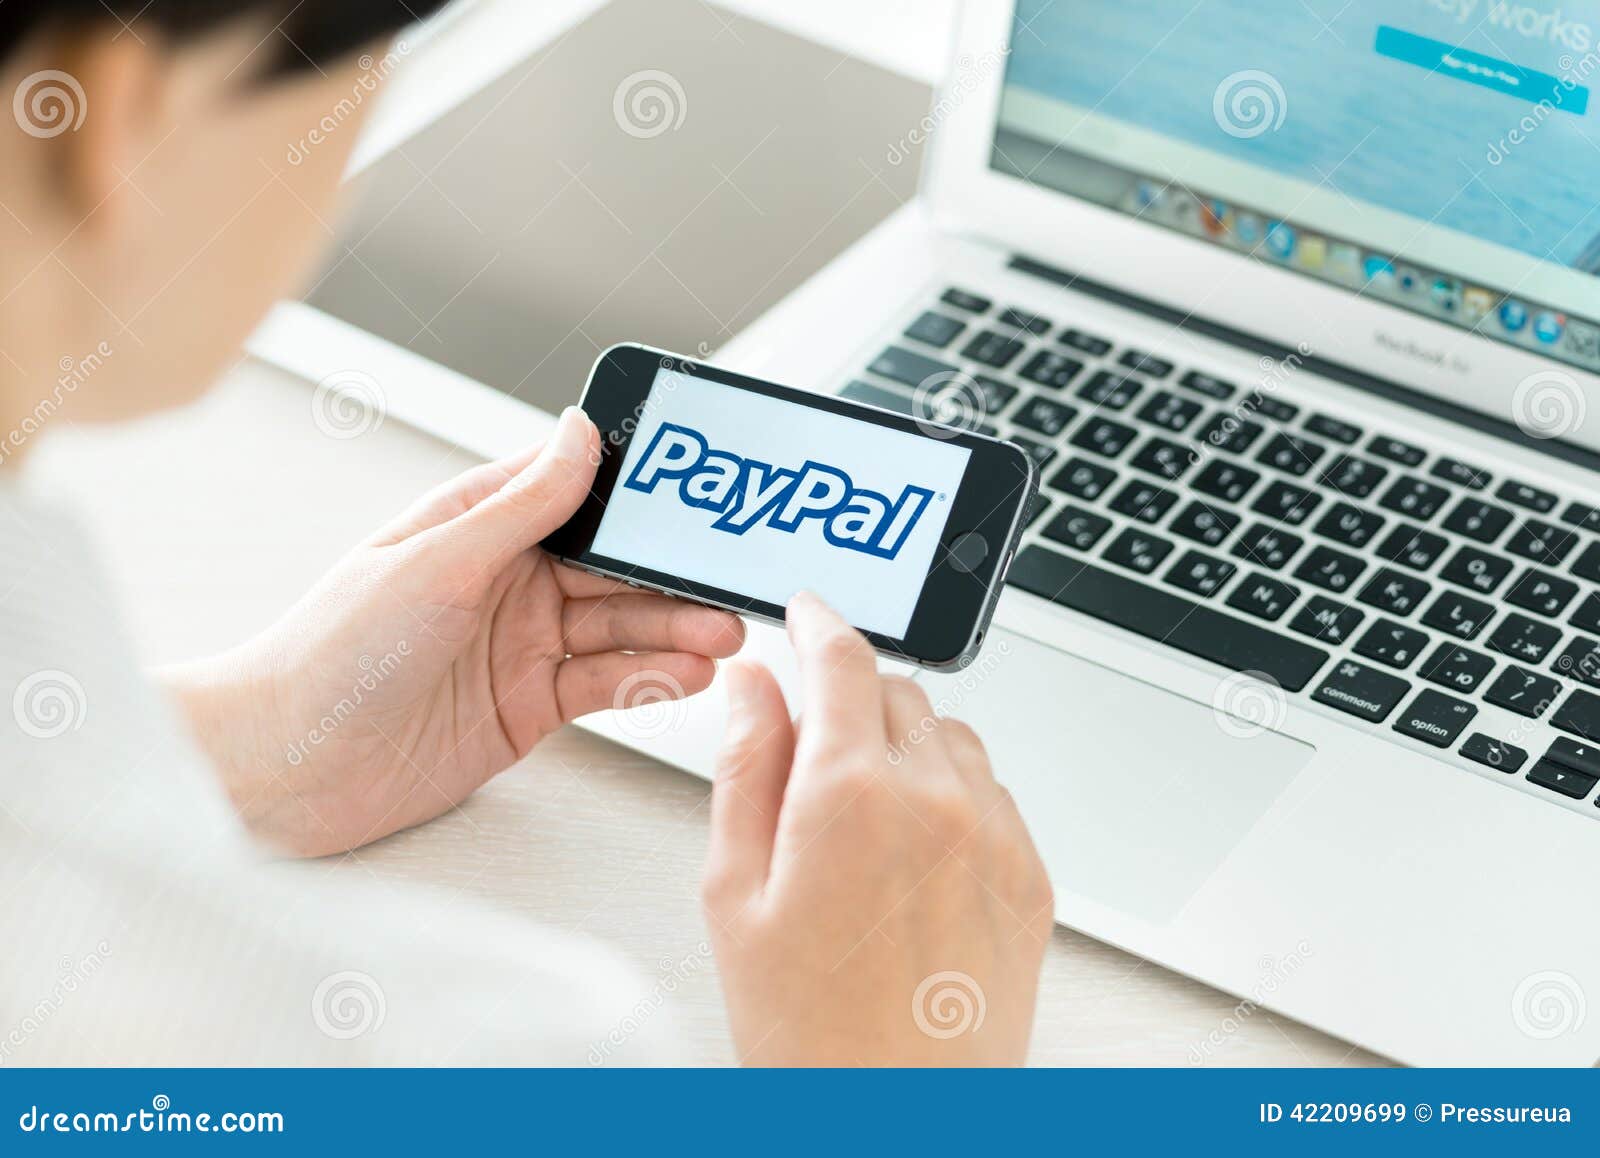 https://thumbs.dreamstime.com/z/paypal-logo-apple-iphone-s-kiev-ukraine-june-person-workplace-holding-hand-brand-new-screen-42209699.jpg